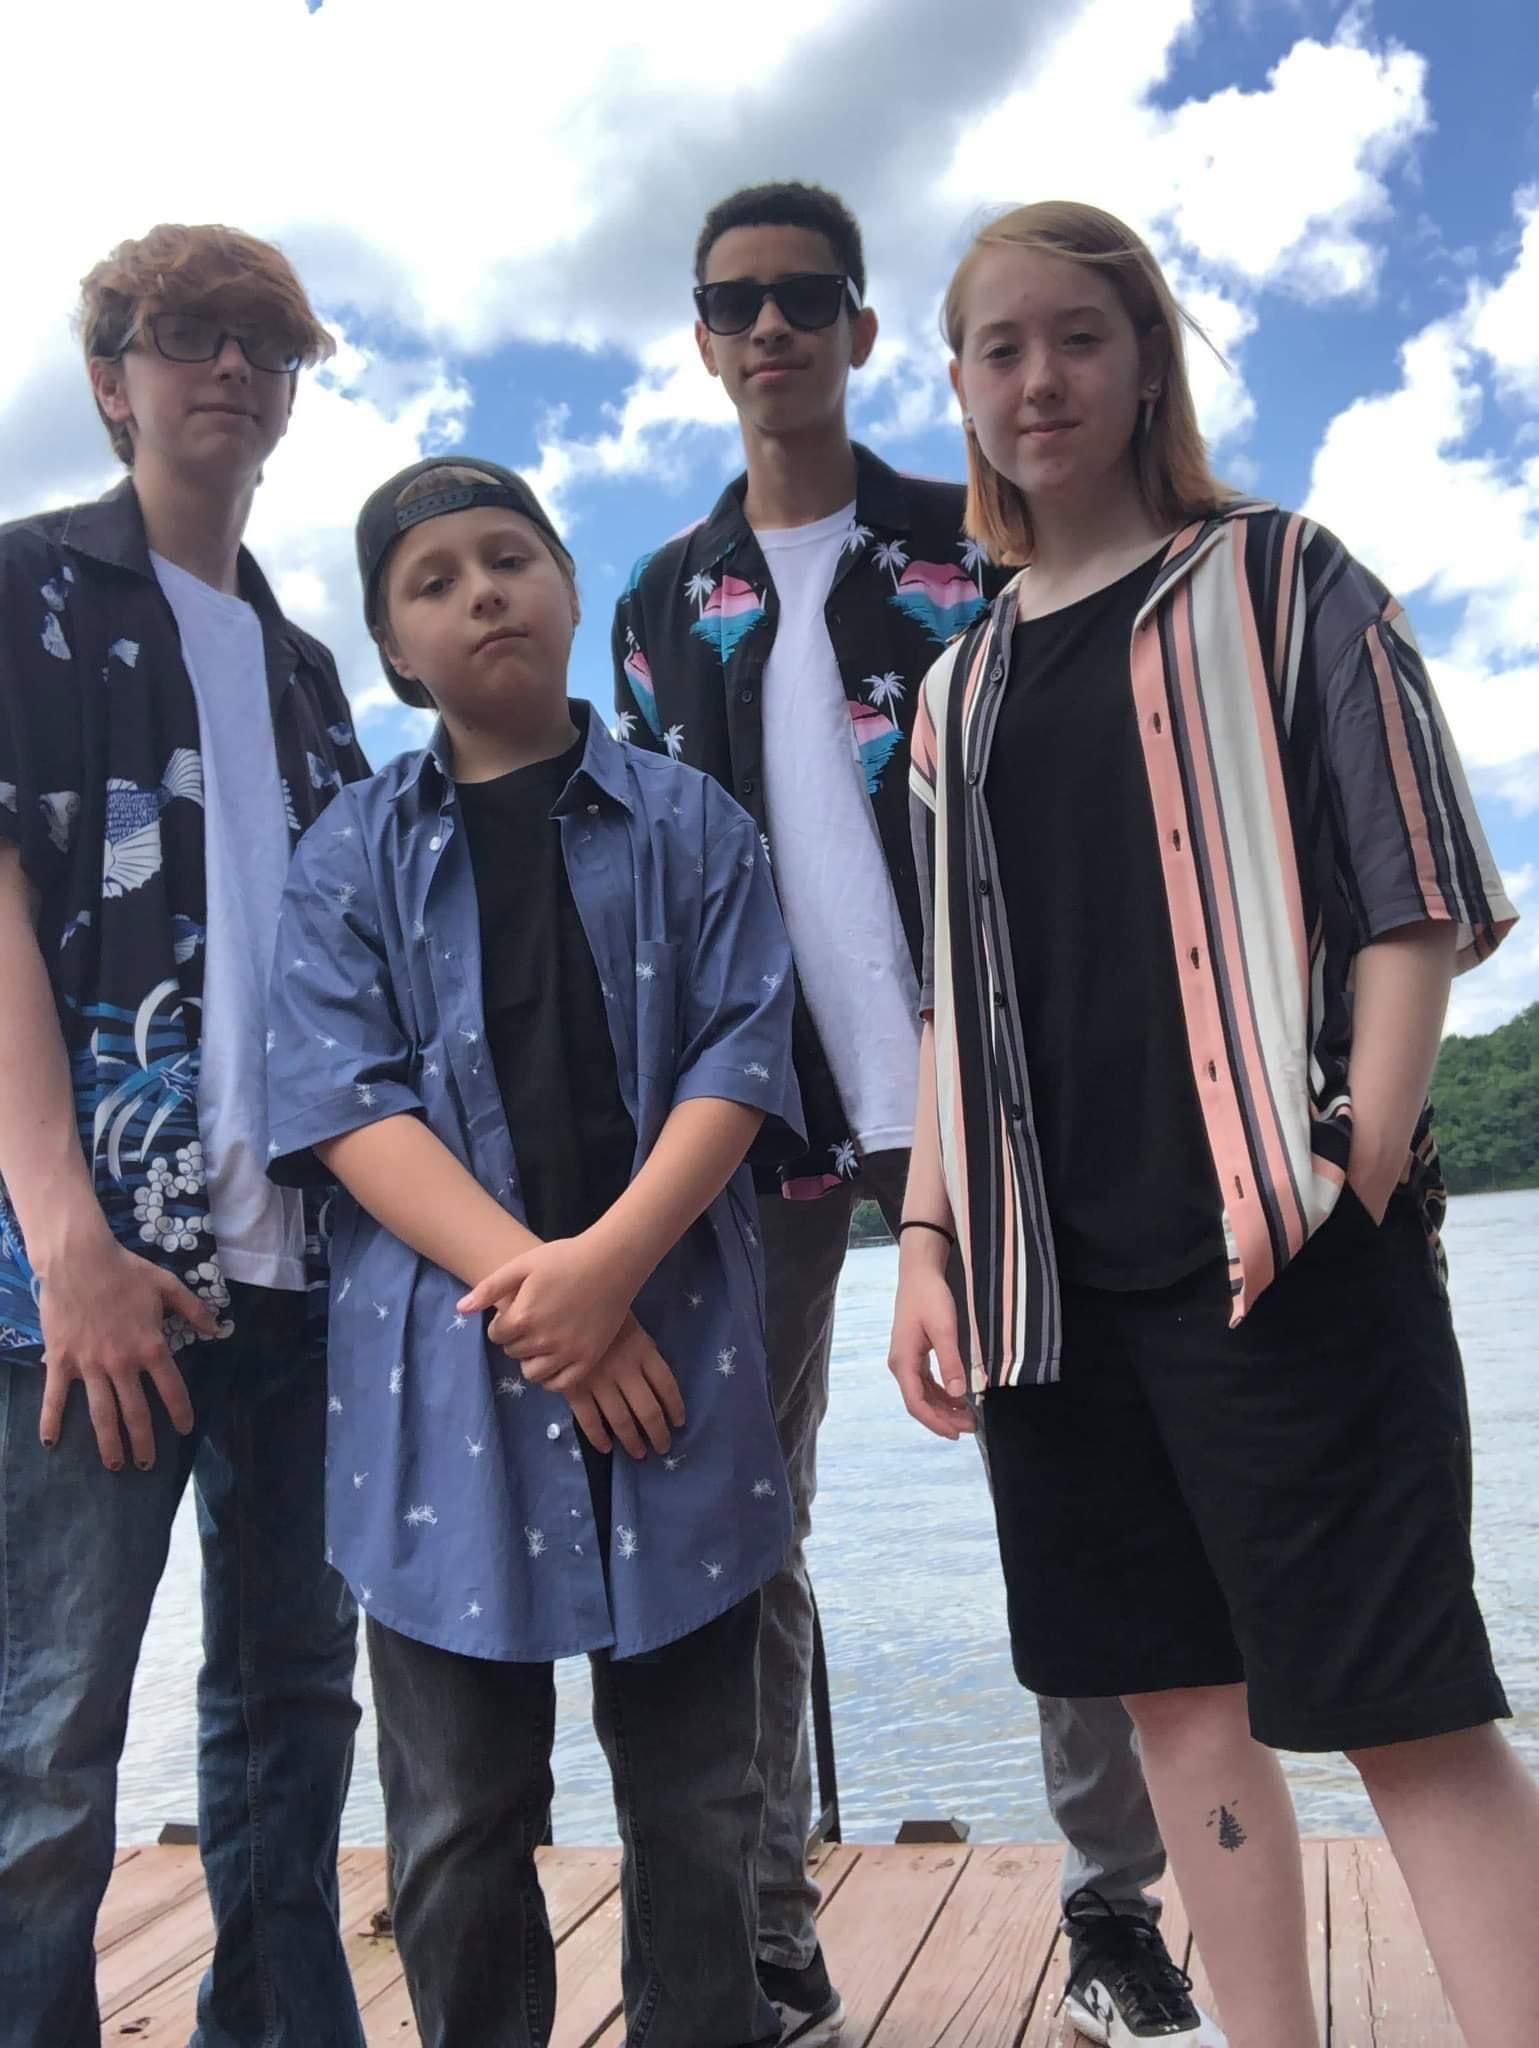 Cousins took this pic, they belong on a cover of a 90s Hip Hop album.